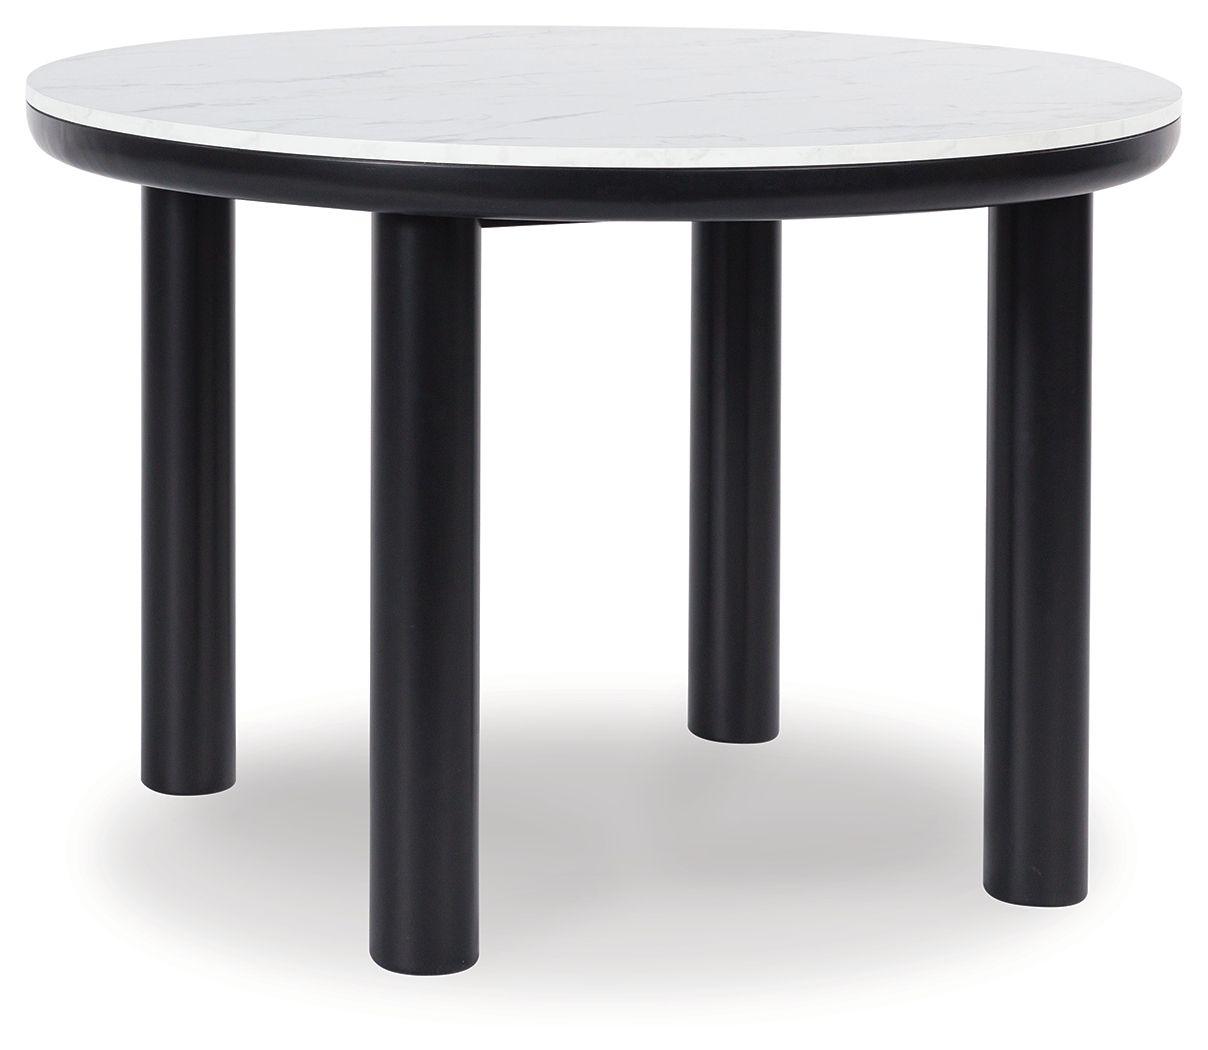 Signature Design by Ashley® - Xandrum - Black - Round Dining Room Table - 5th Avenue Furniture